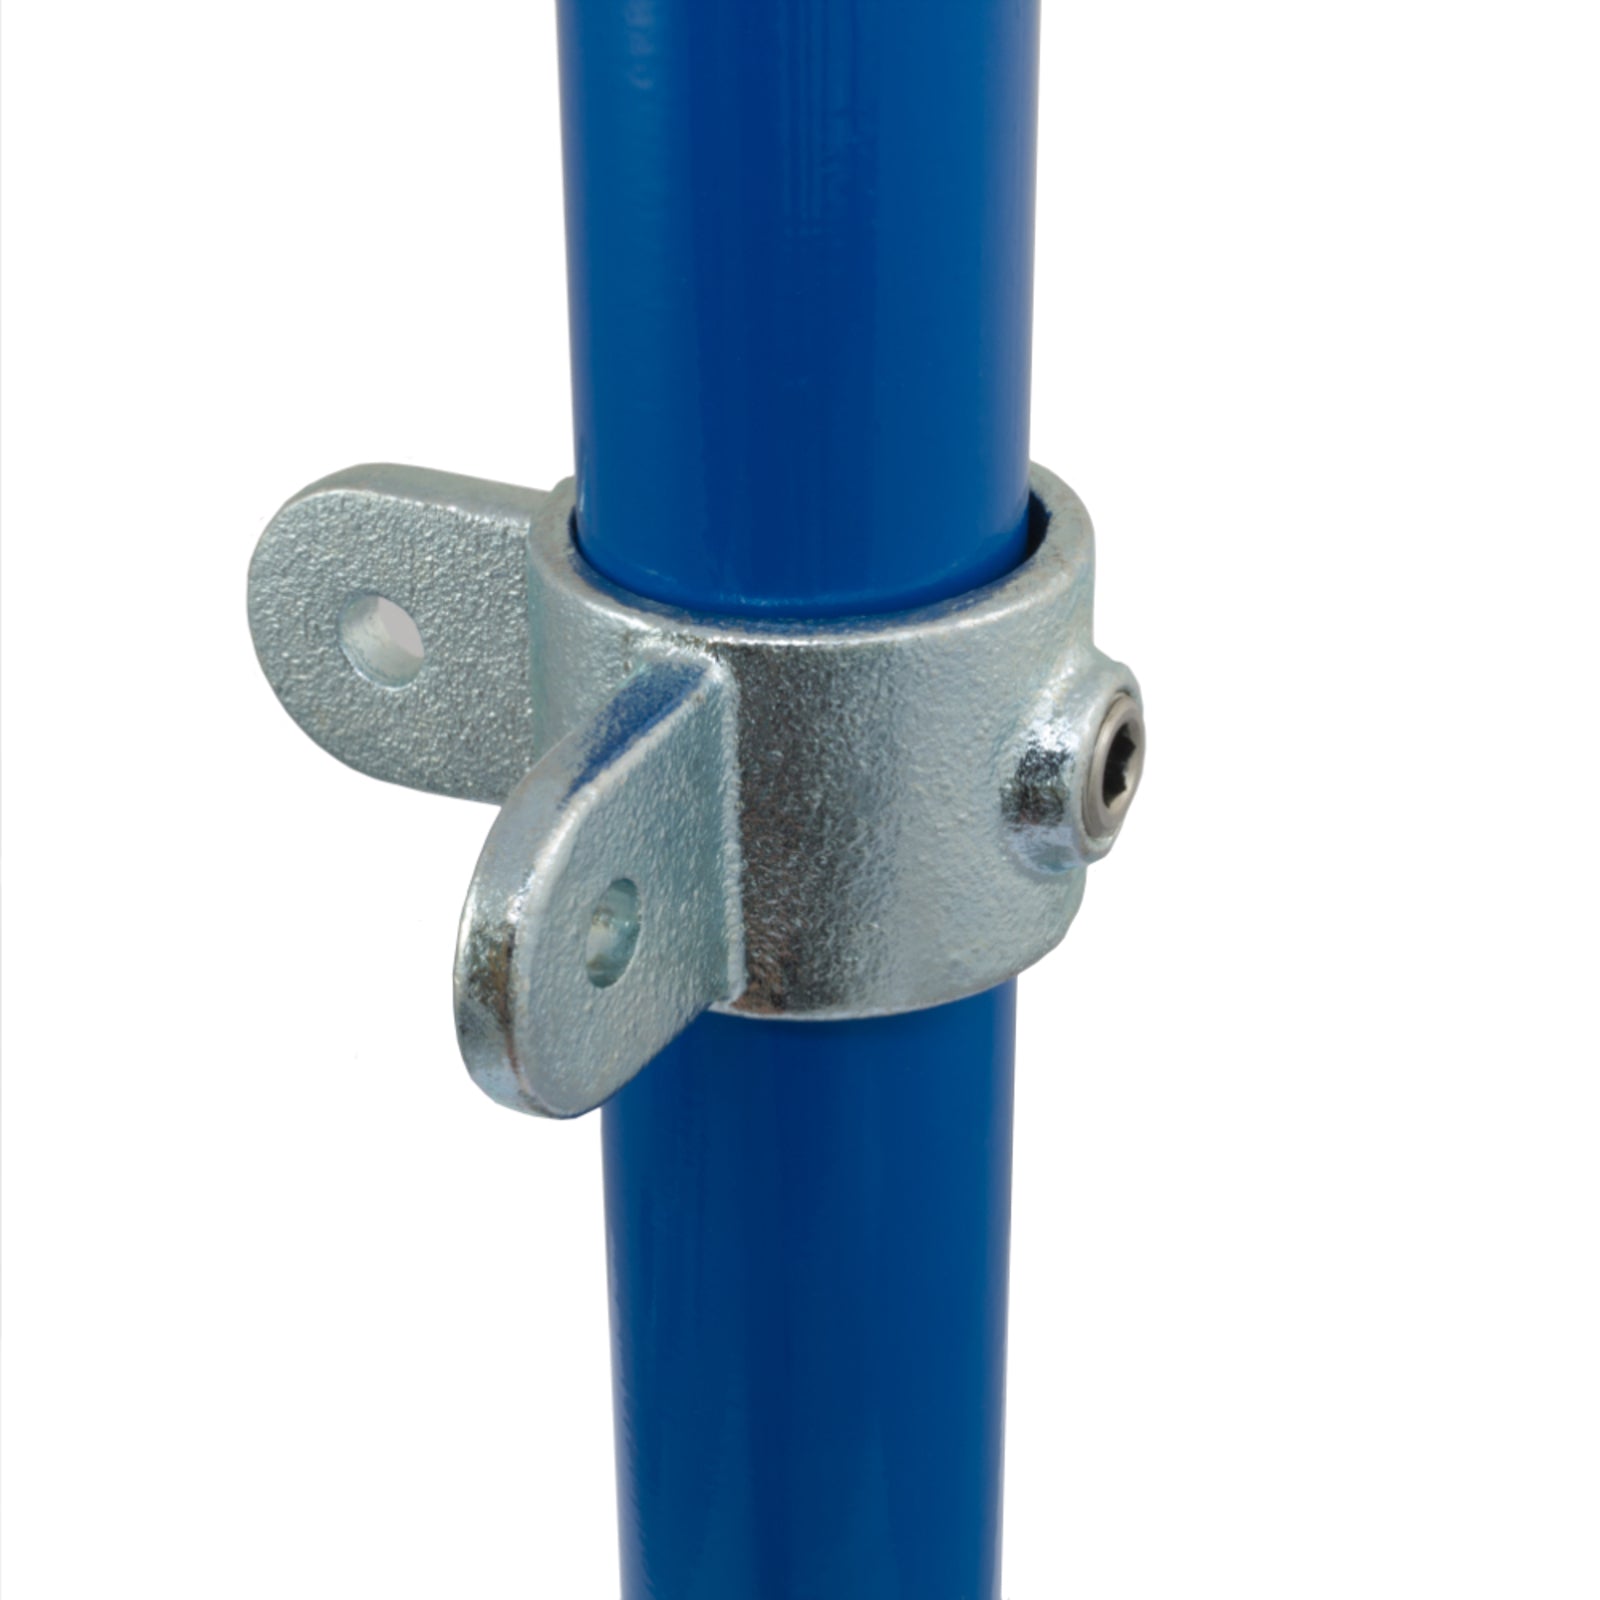 Corner Swivel Combination Male Part, Interclamp Code 168M. Shop rail, pipe and fence fittings online chain.com.au. Australia wide shipping.